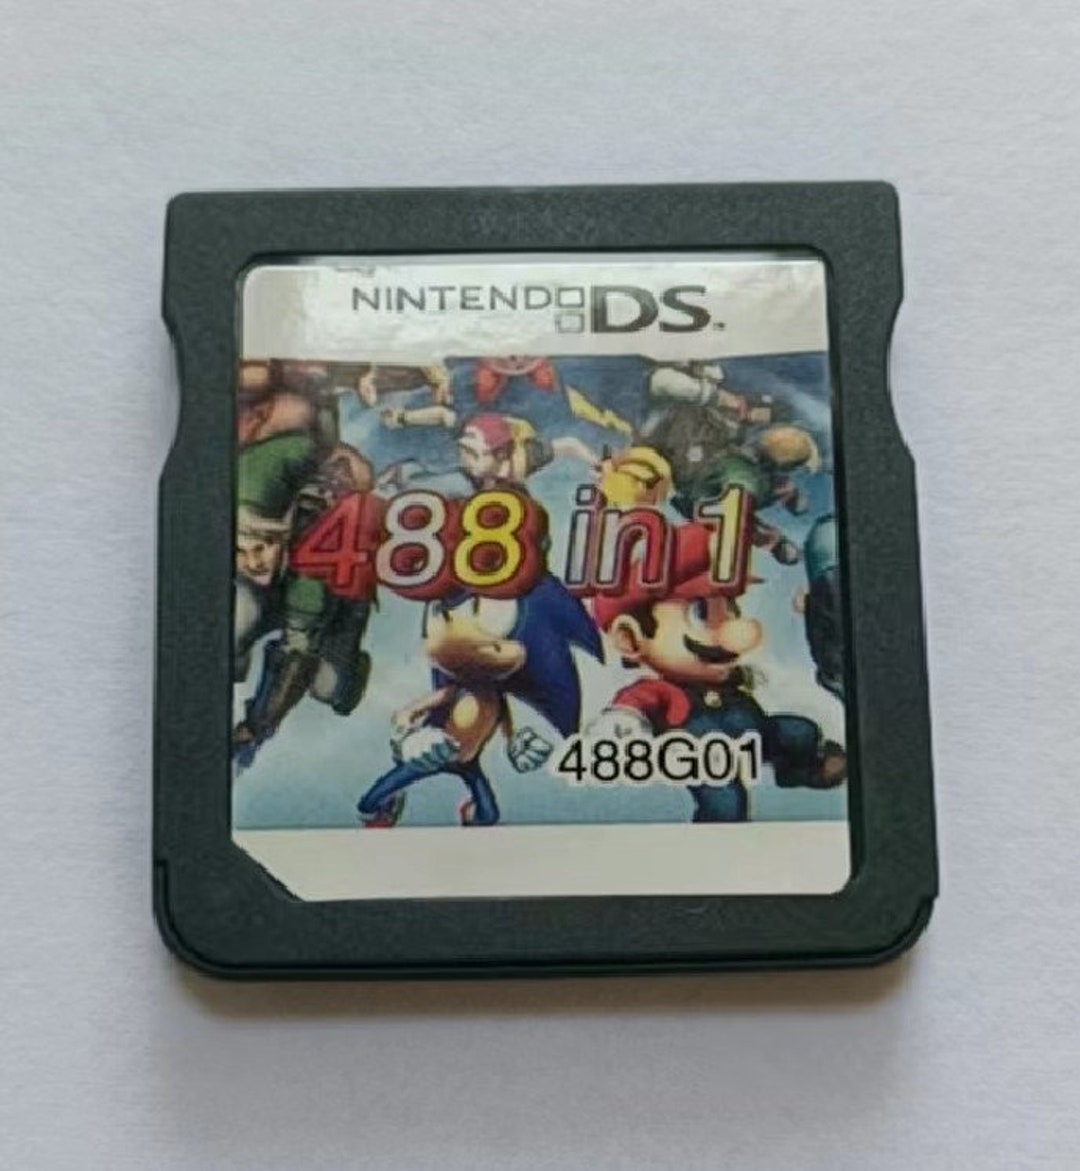 Multi 488 in 1 NDS Games Combined Video Cartridge Nintendo - Etsy